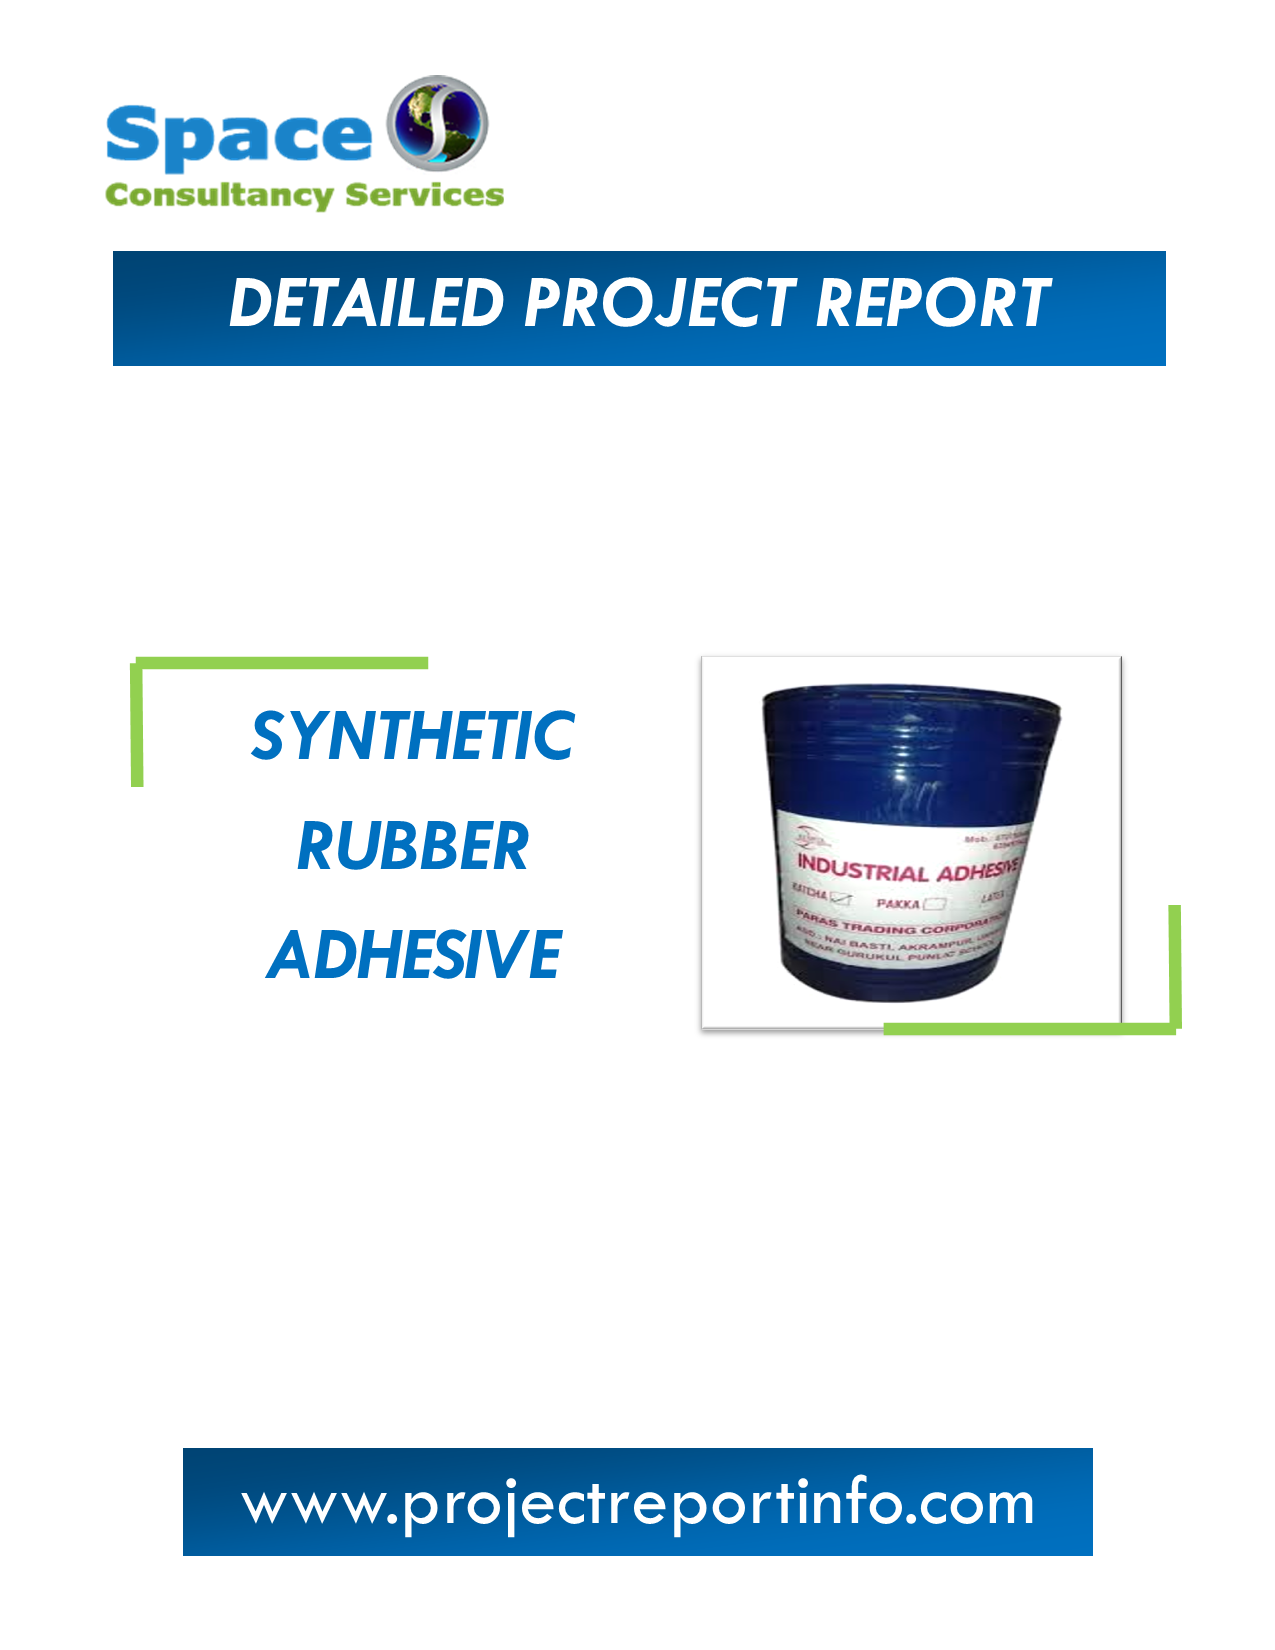 Project Report on Synthetic Rubber Adhesive